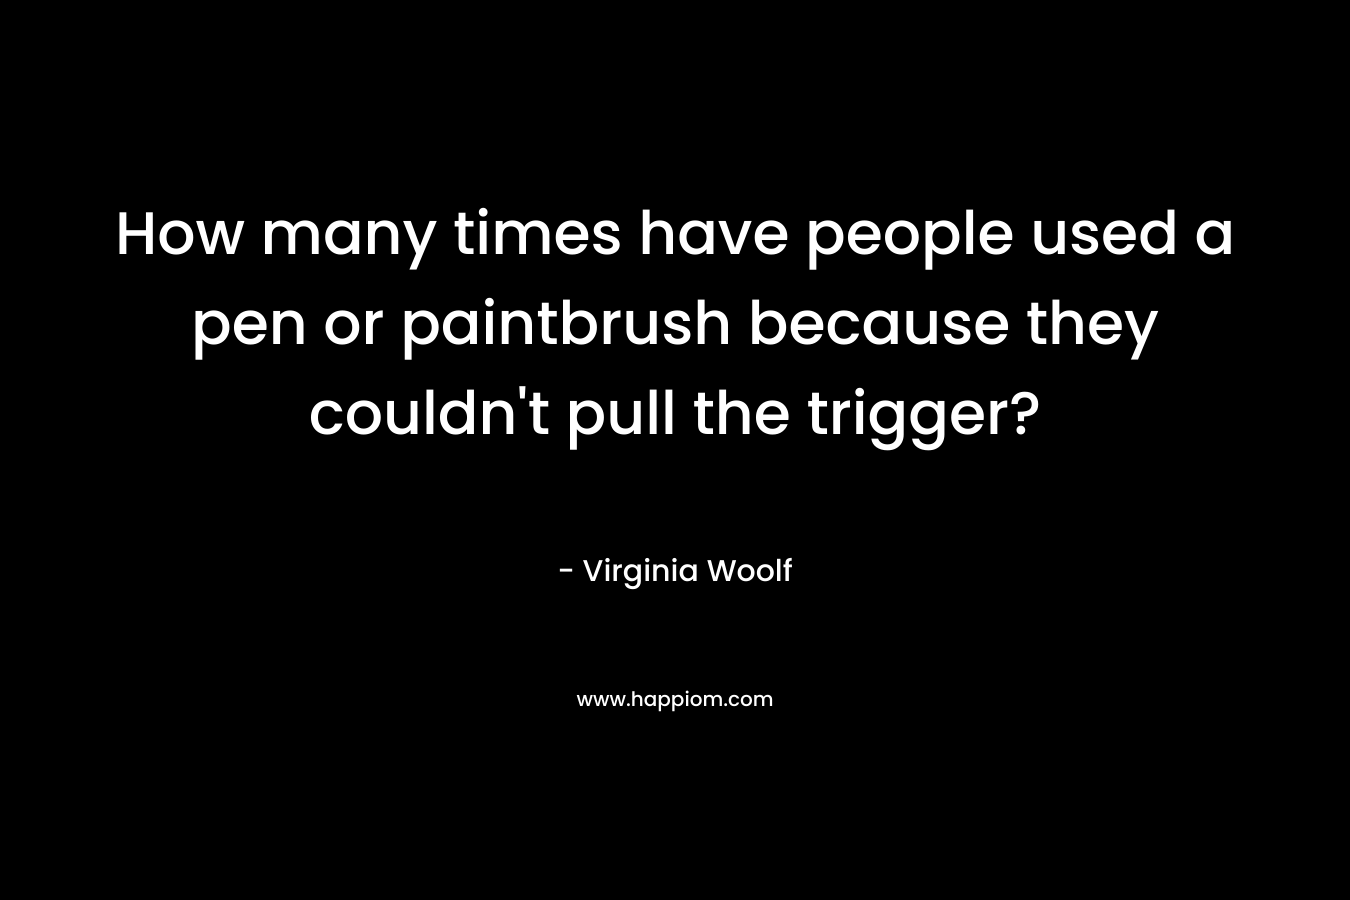 How many times have people used a pen or paintbrush because they couldn’t pull the trigger? – Virginia Woolf